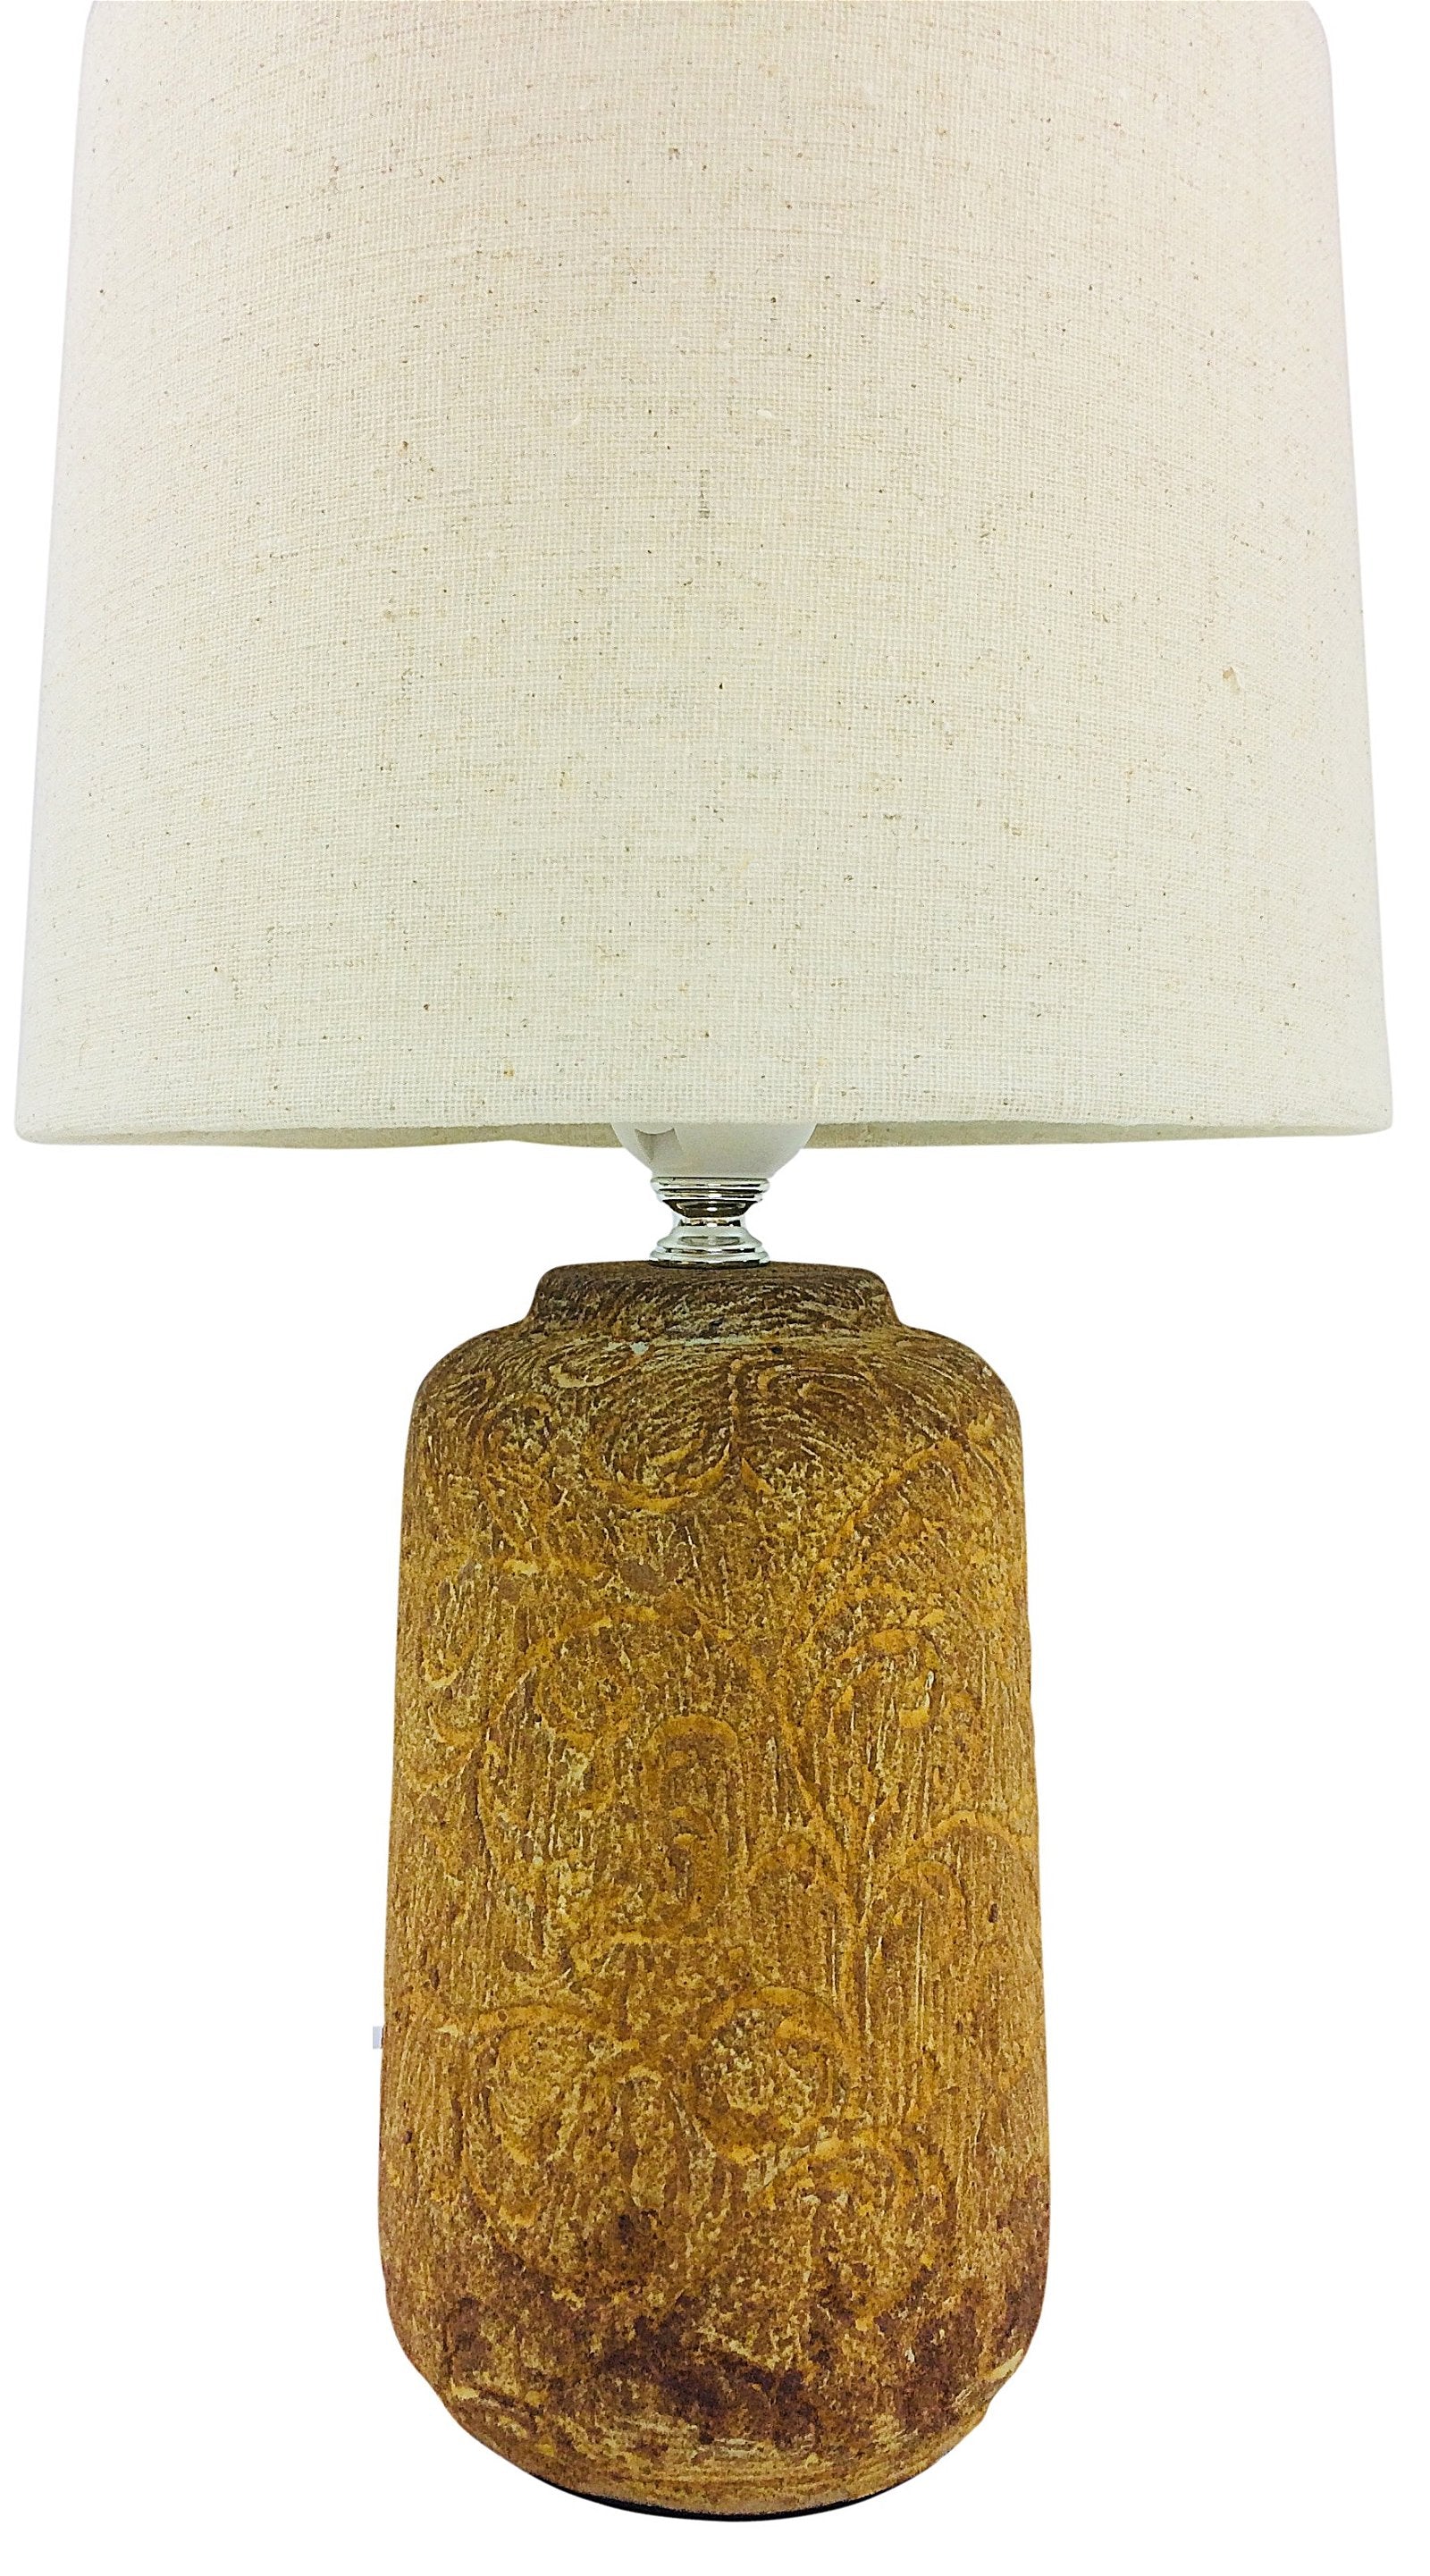 Golden Brown Distressed Lamp And Shade 38cm